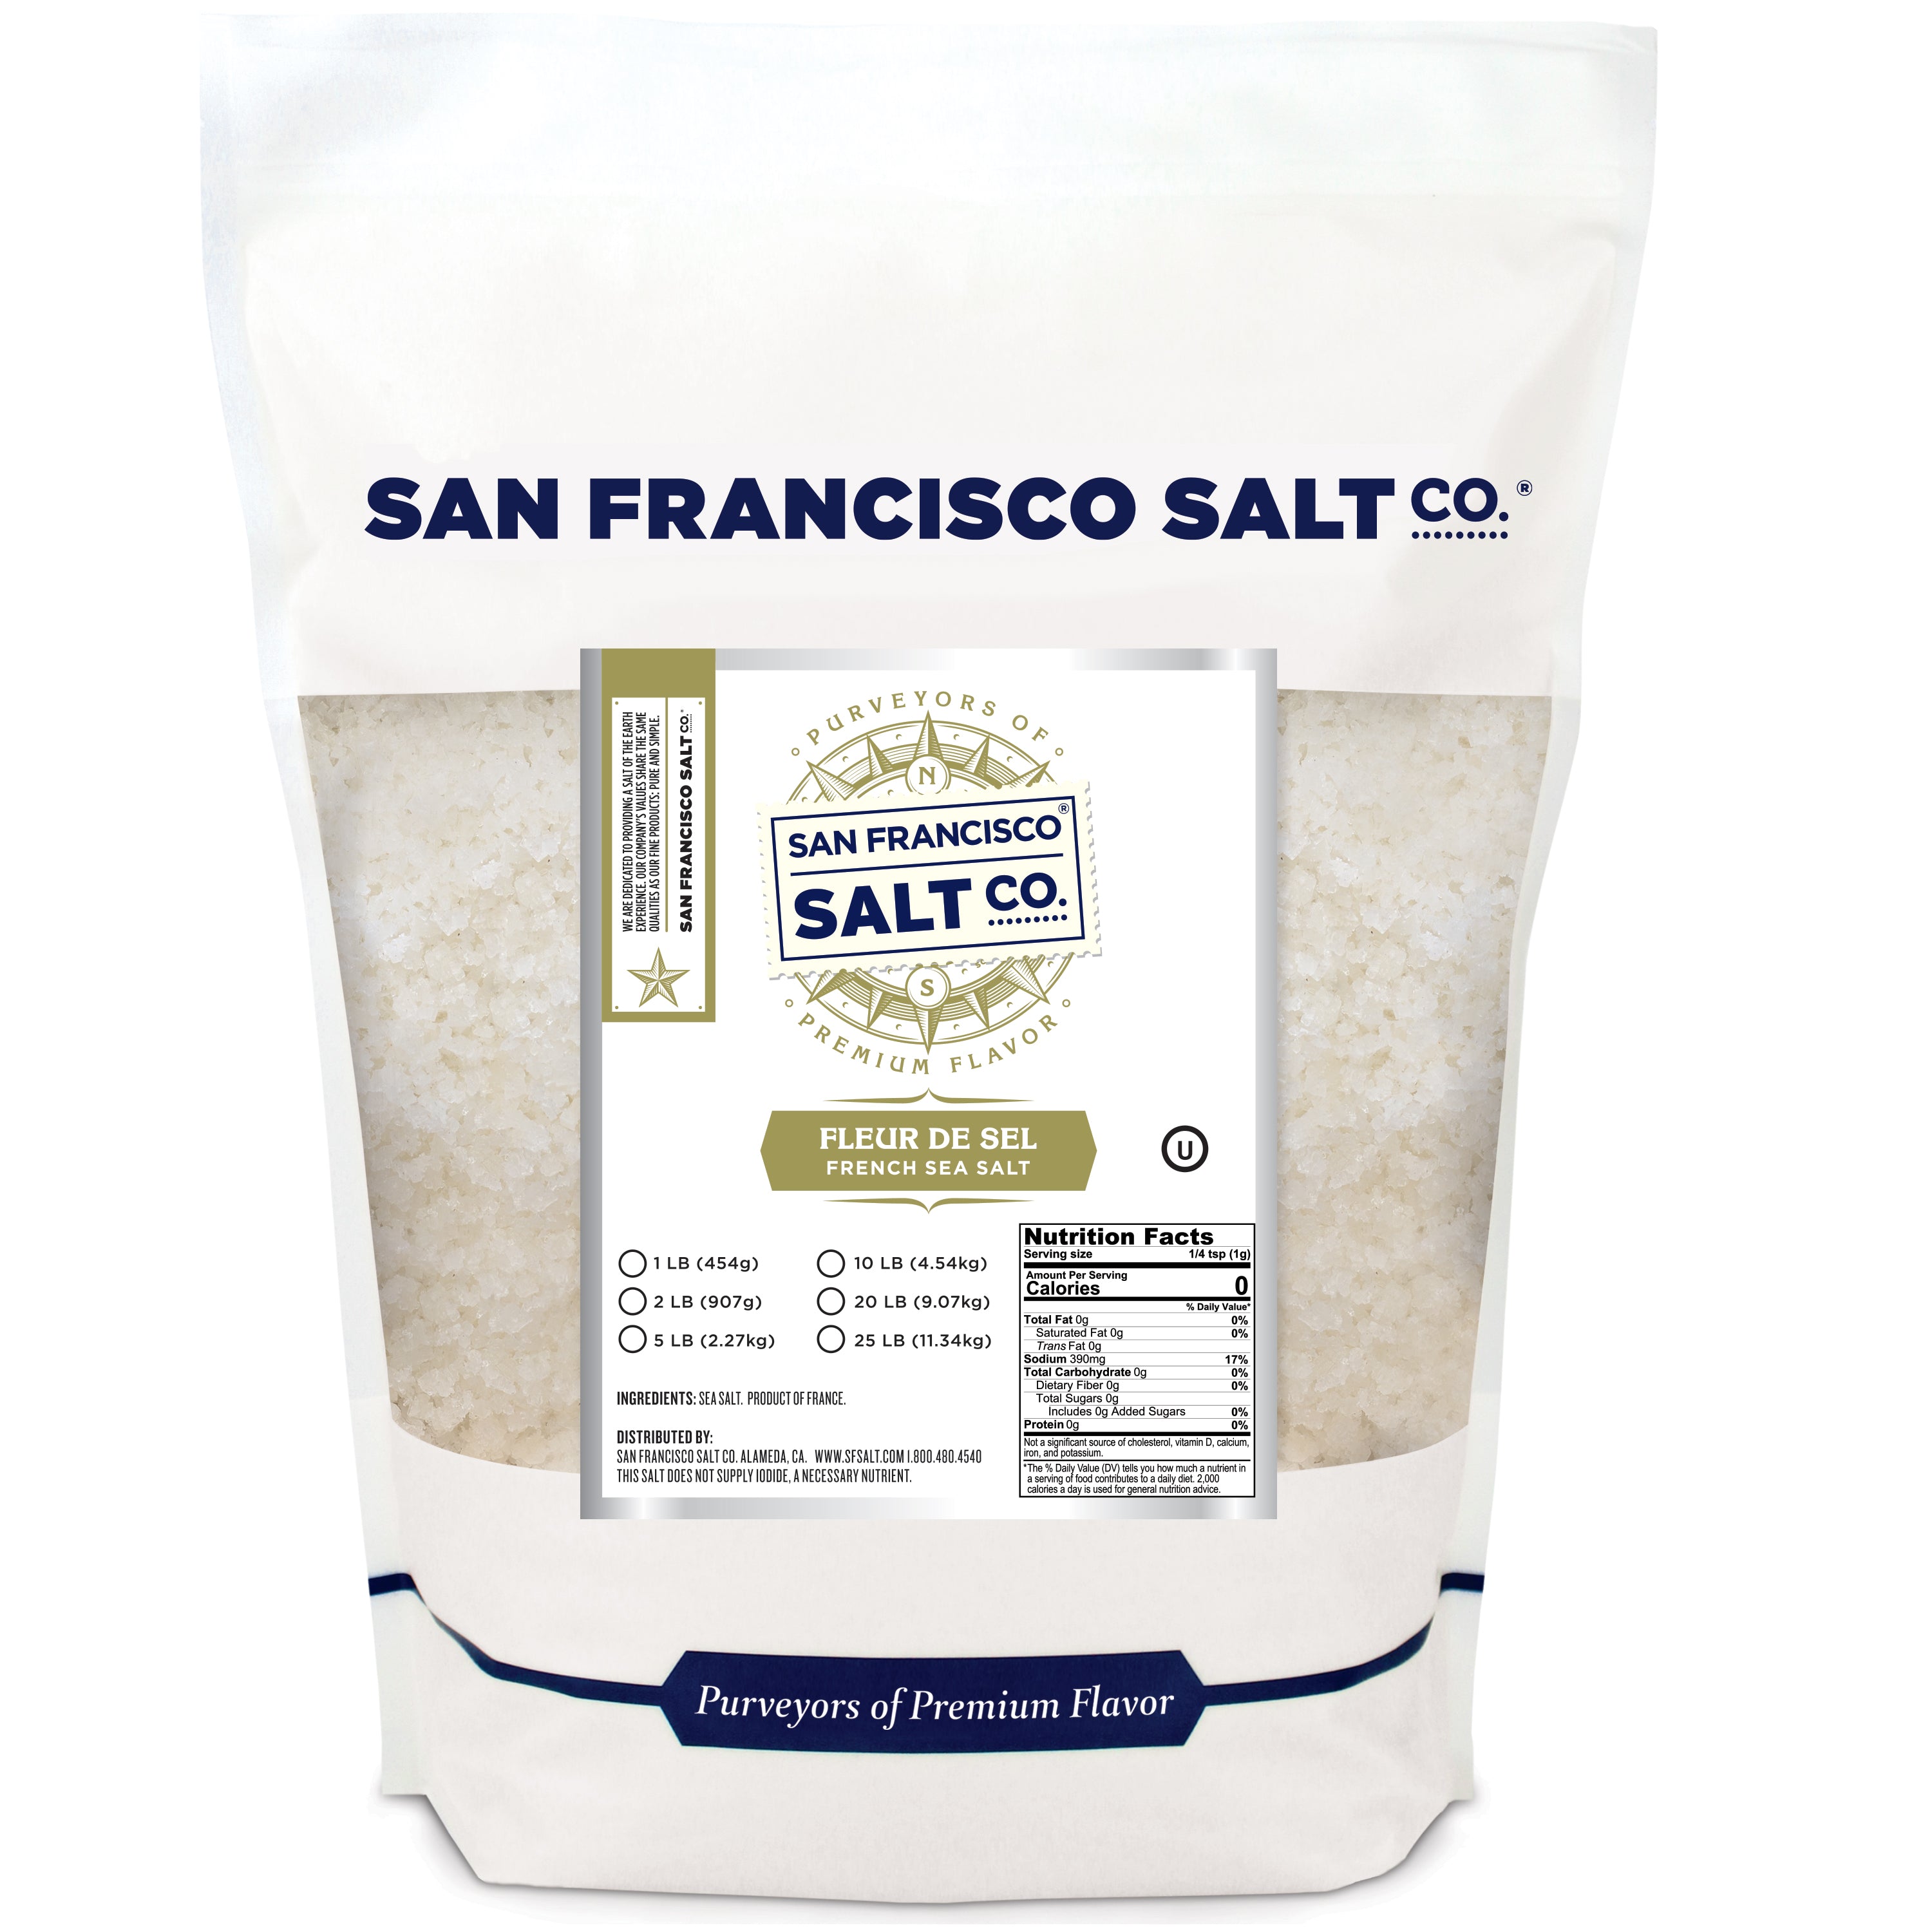 What Is Fleur de Sel – And Why Is It So Expensive?